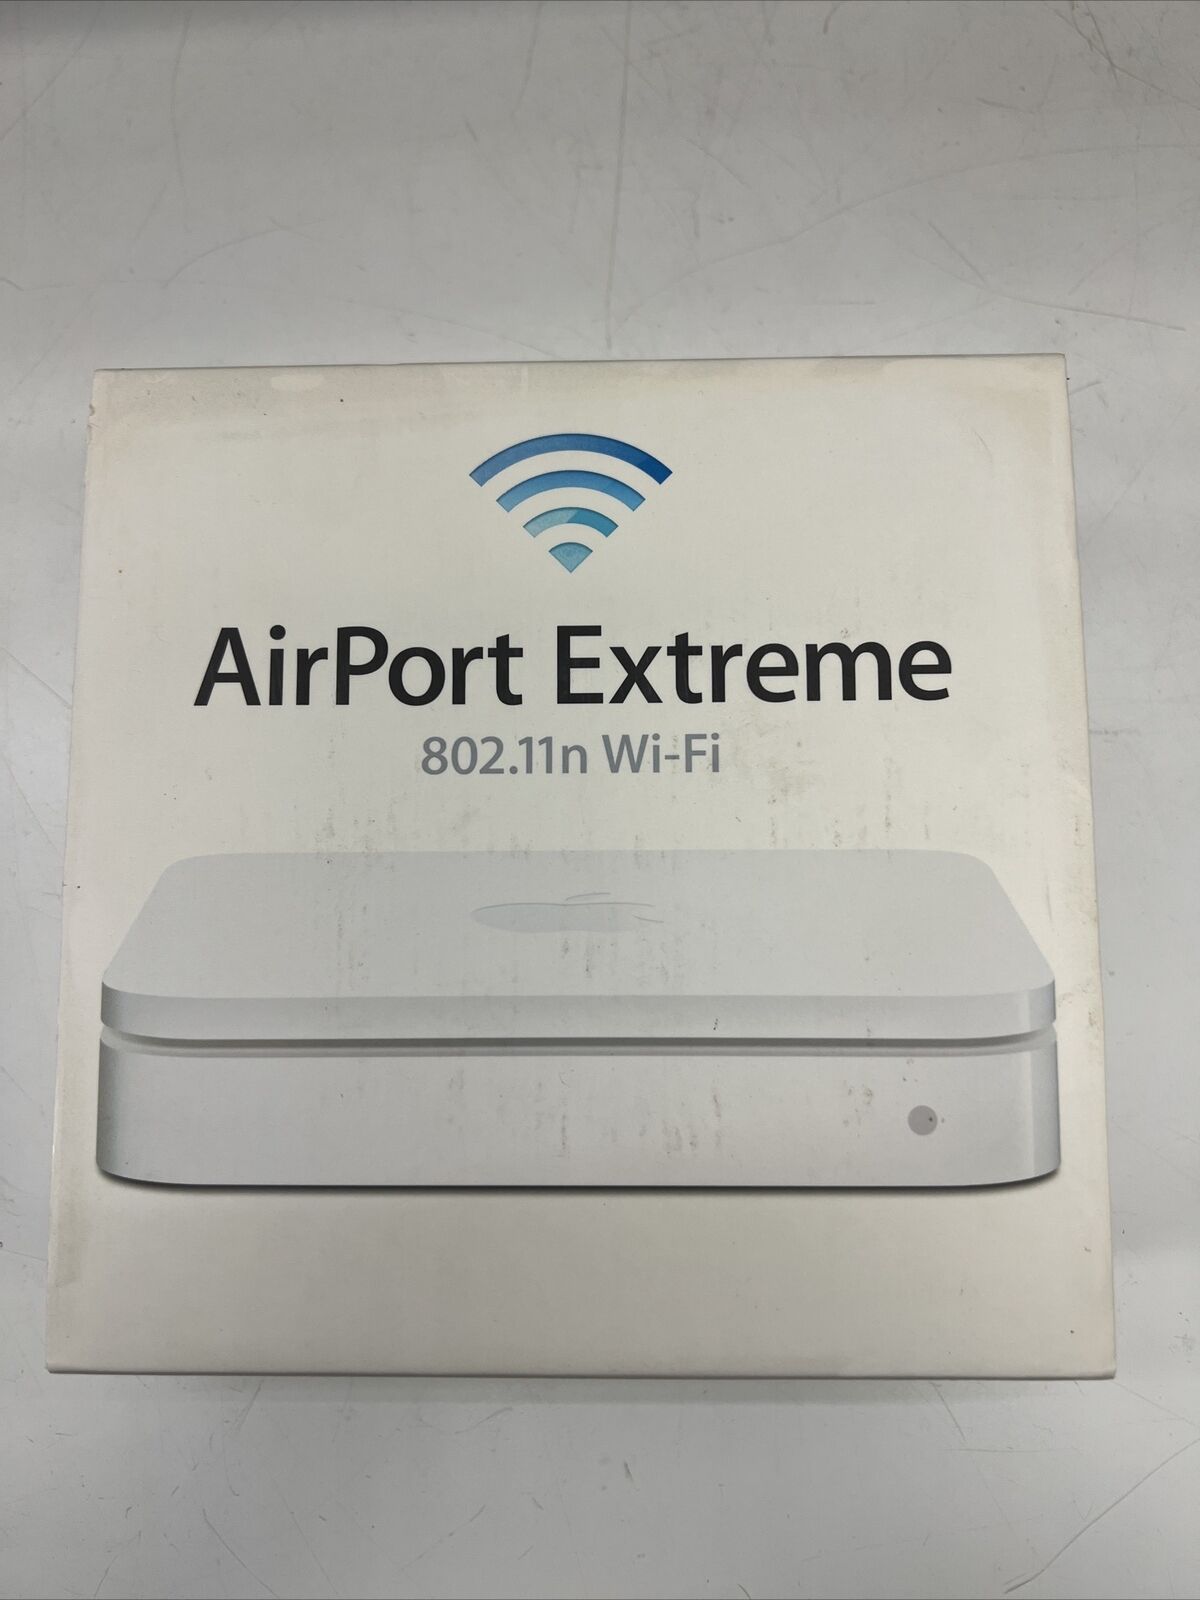 Apple MB053LL/A 3-Port Gigabit Wireless N Router A1143 Tested